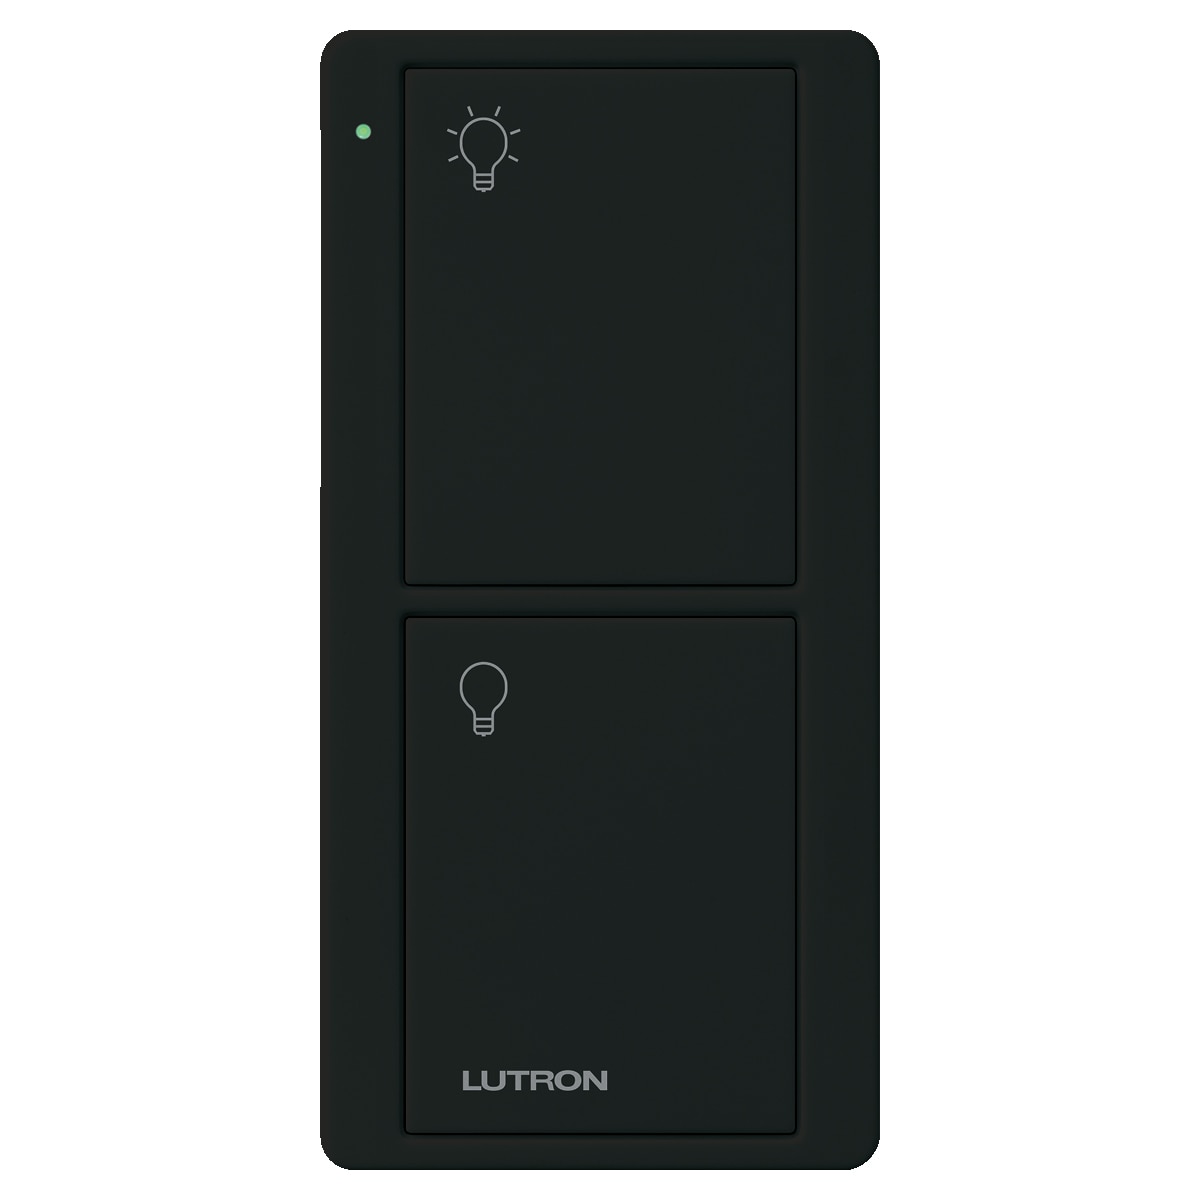 Remote for light switch • Compare & see prices now »